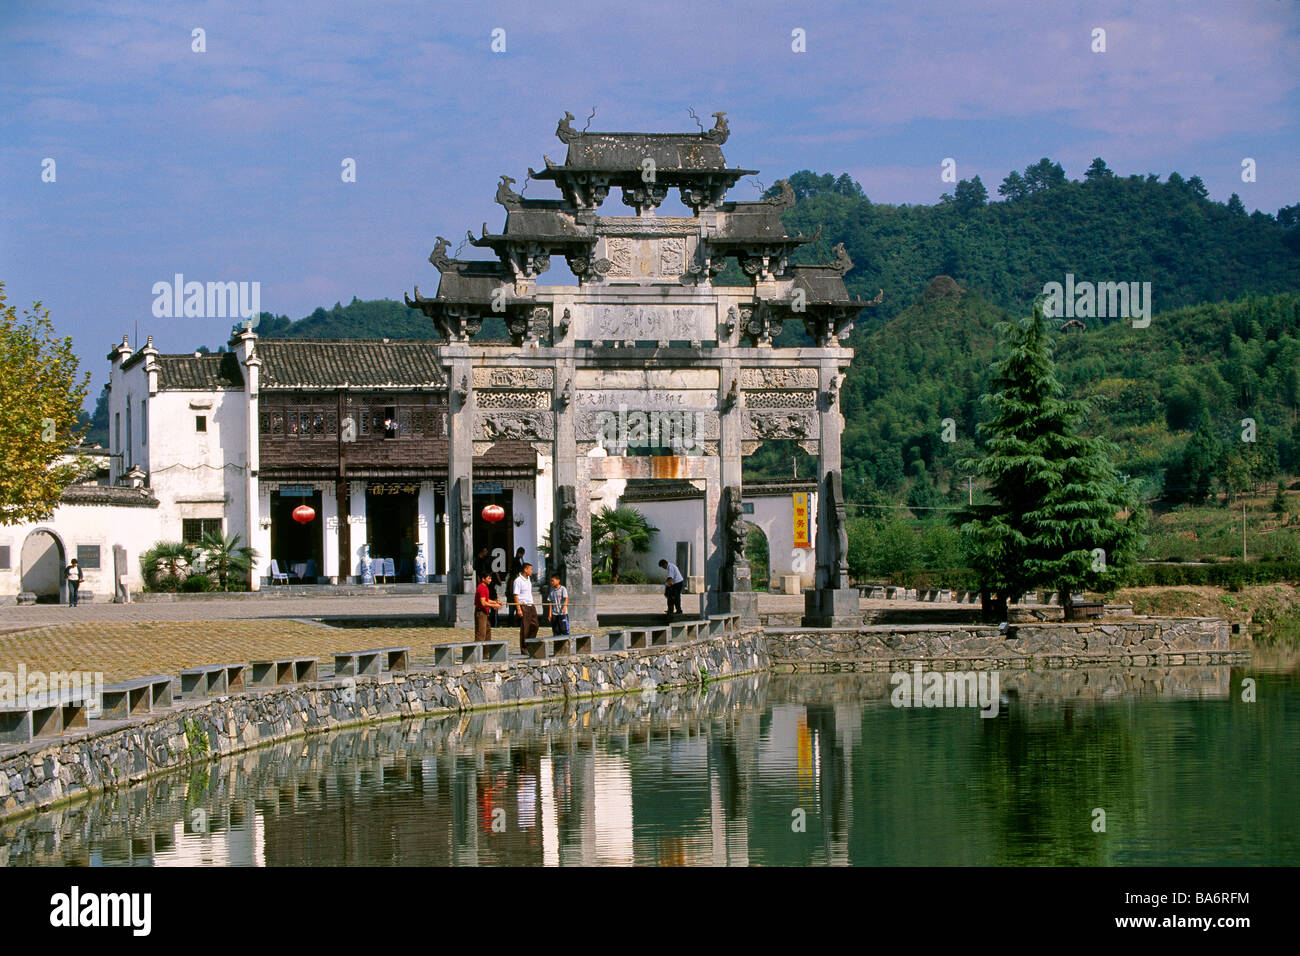 China, Anhui province, ancient village of Xidi classified as World Heritage by UNESCO Stock Photo